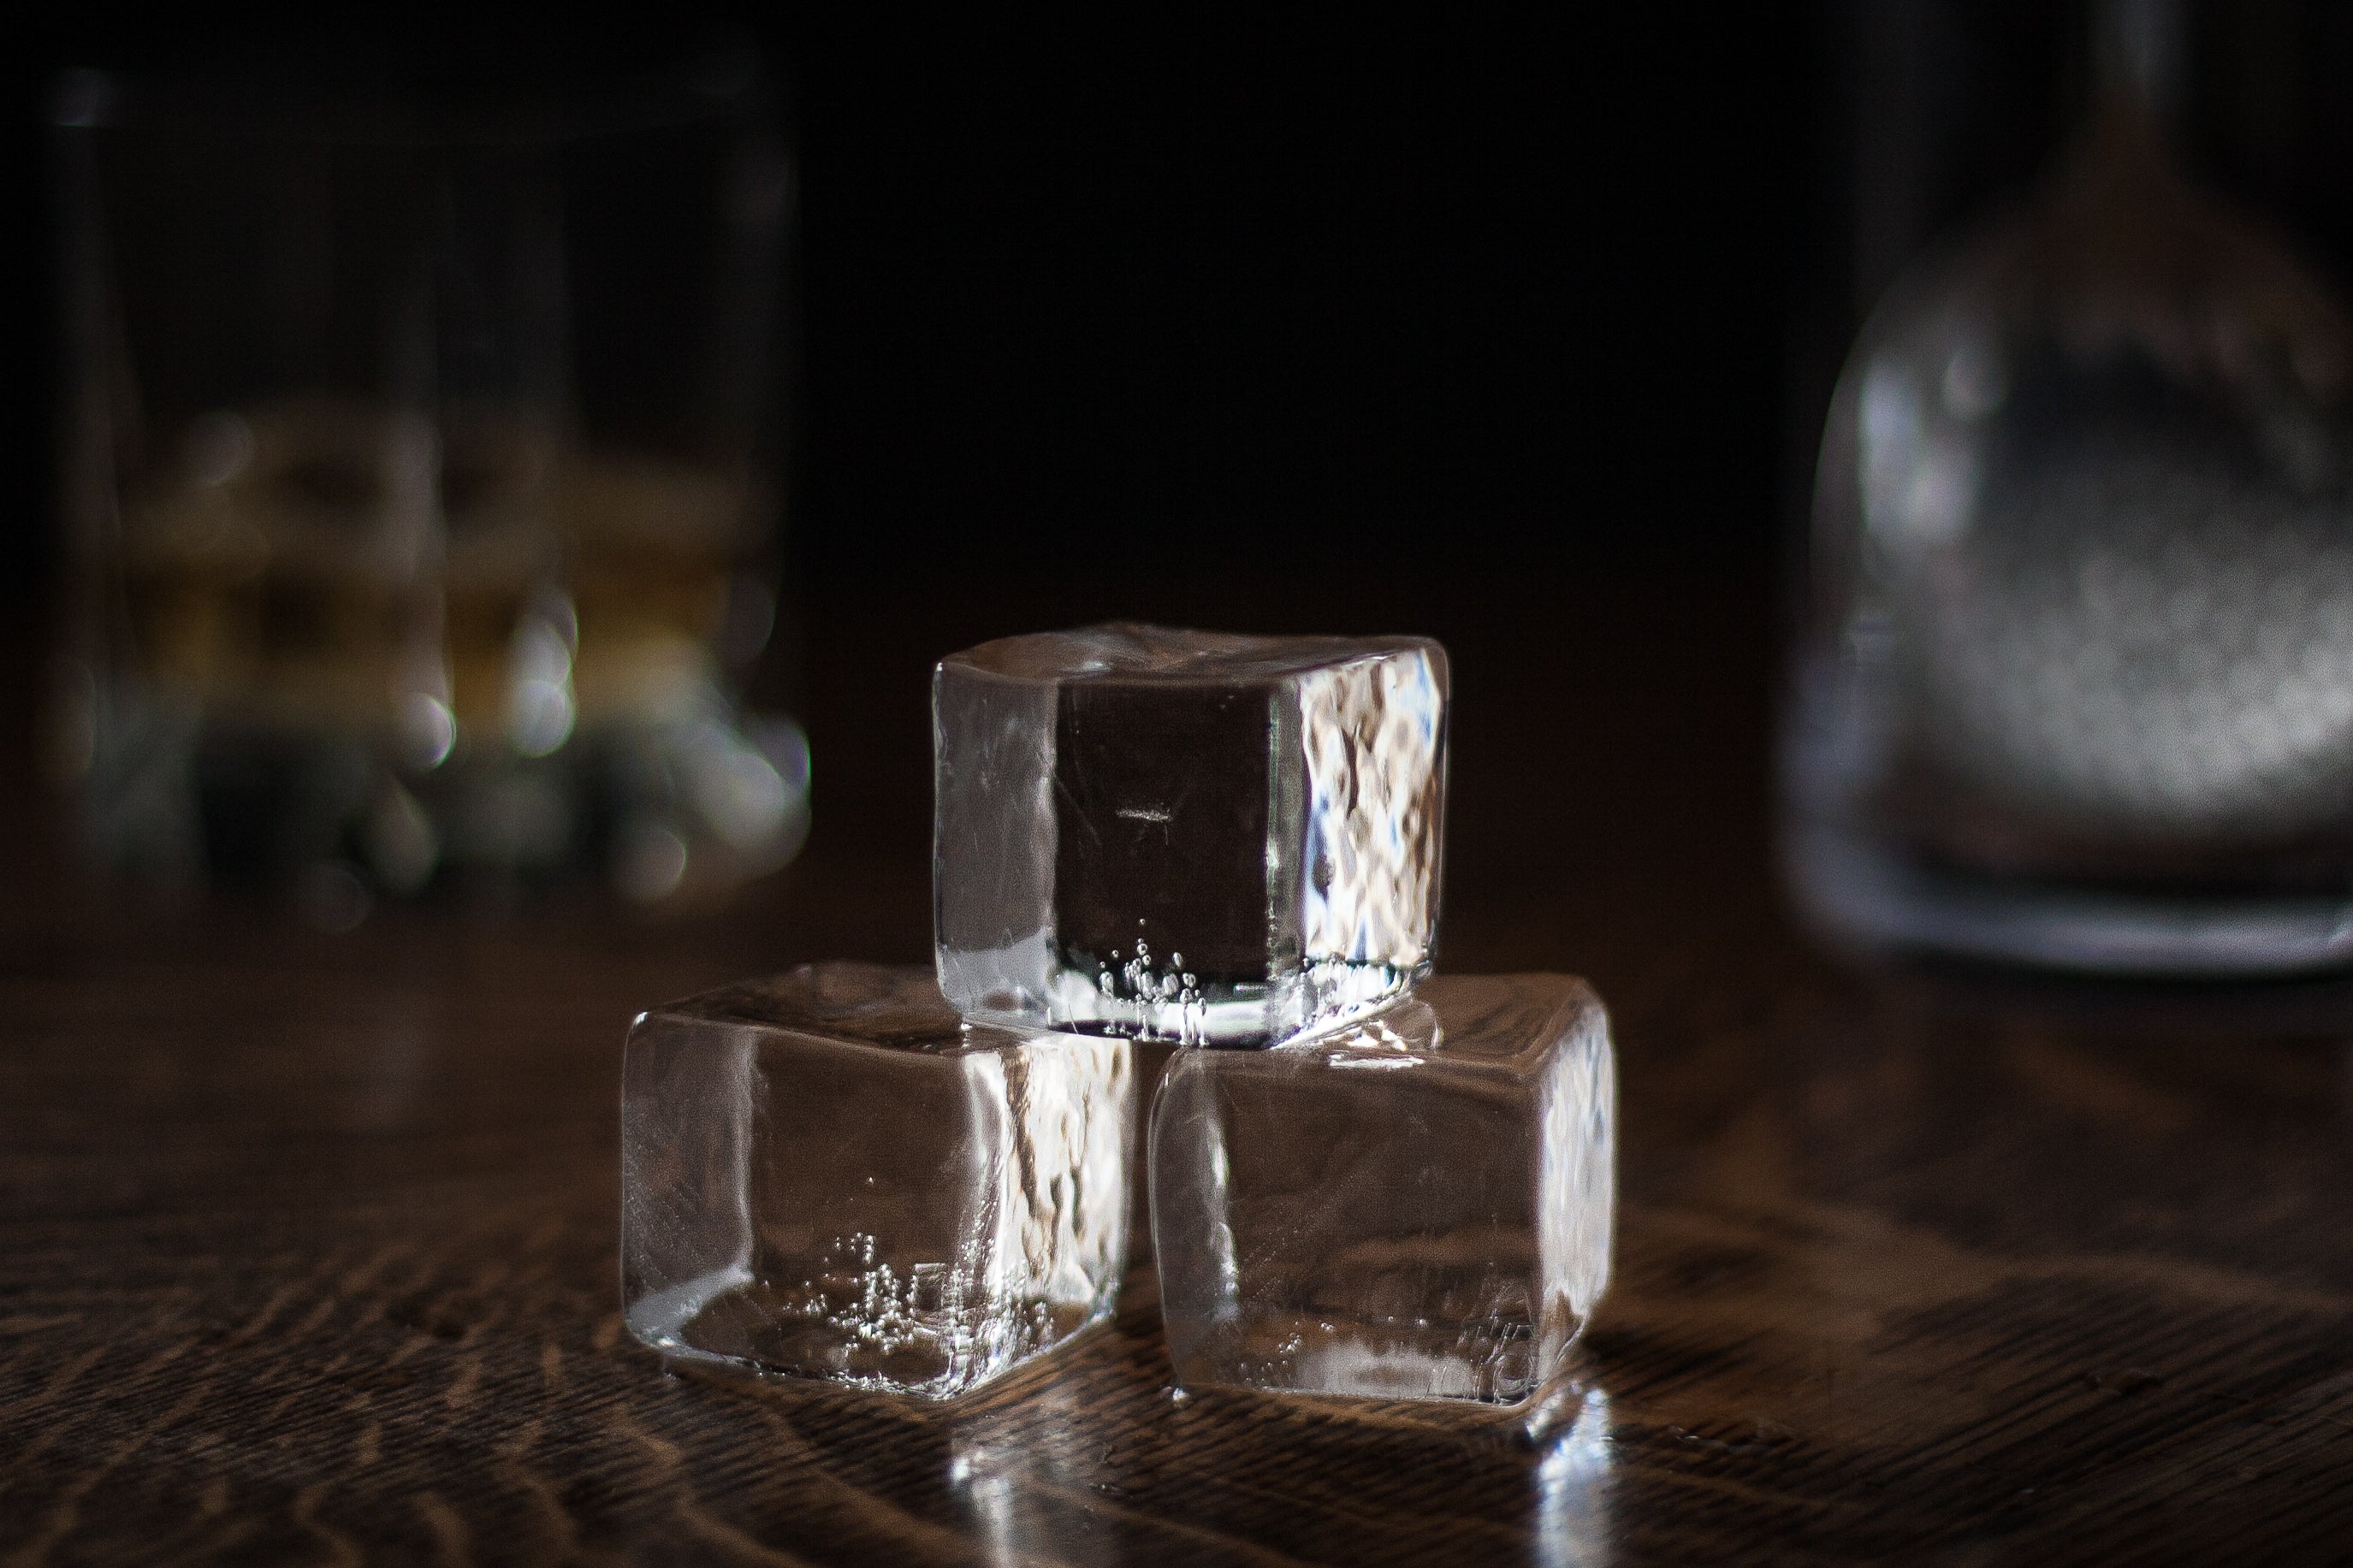 Why Does Water Freeze into Cloudy Ice Cubes in My Freezer?